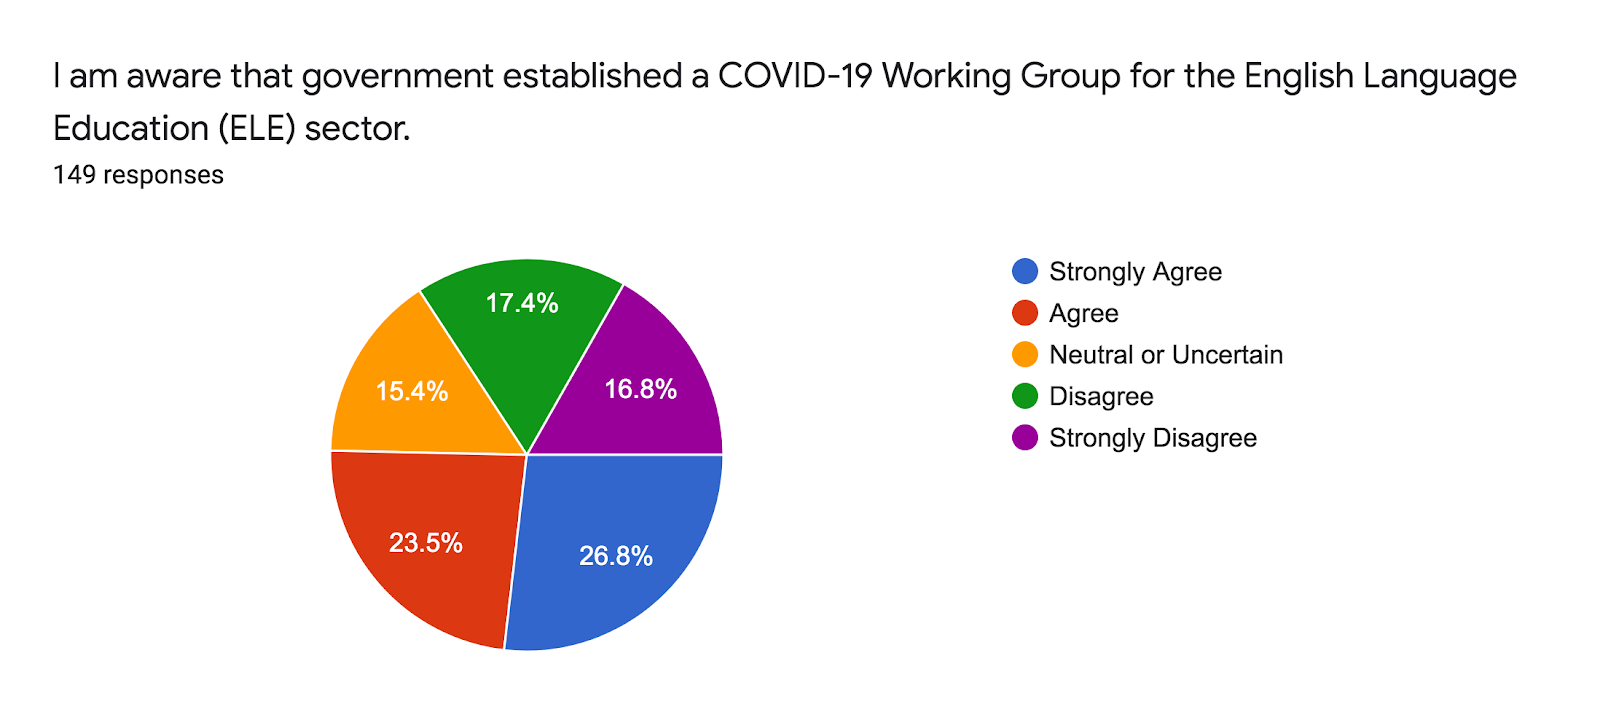 Forms response chart. Question title: I am aware that government established a COVID-19 Working Group for the English Language Education (ELE) sector.. Number of responses: 149 responses.